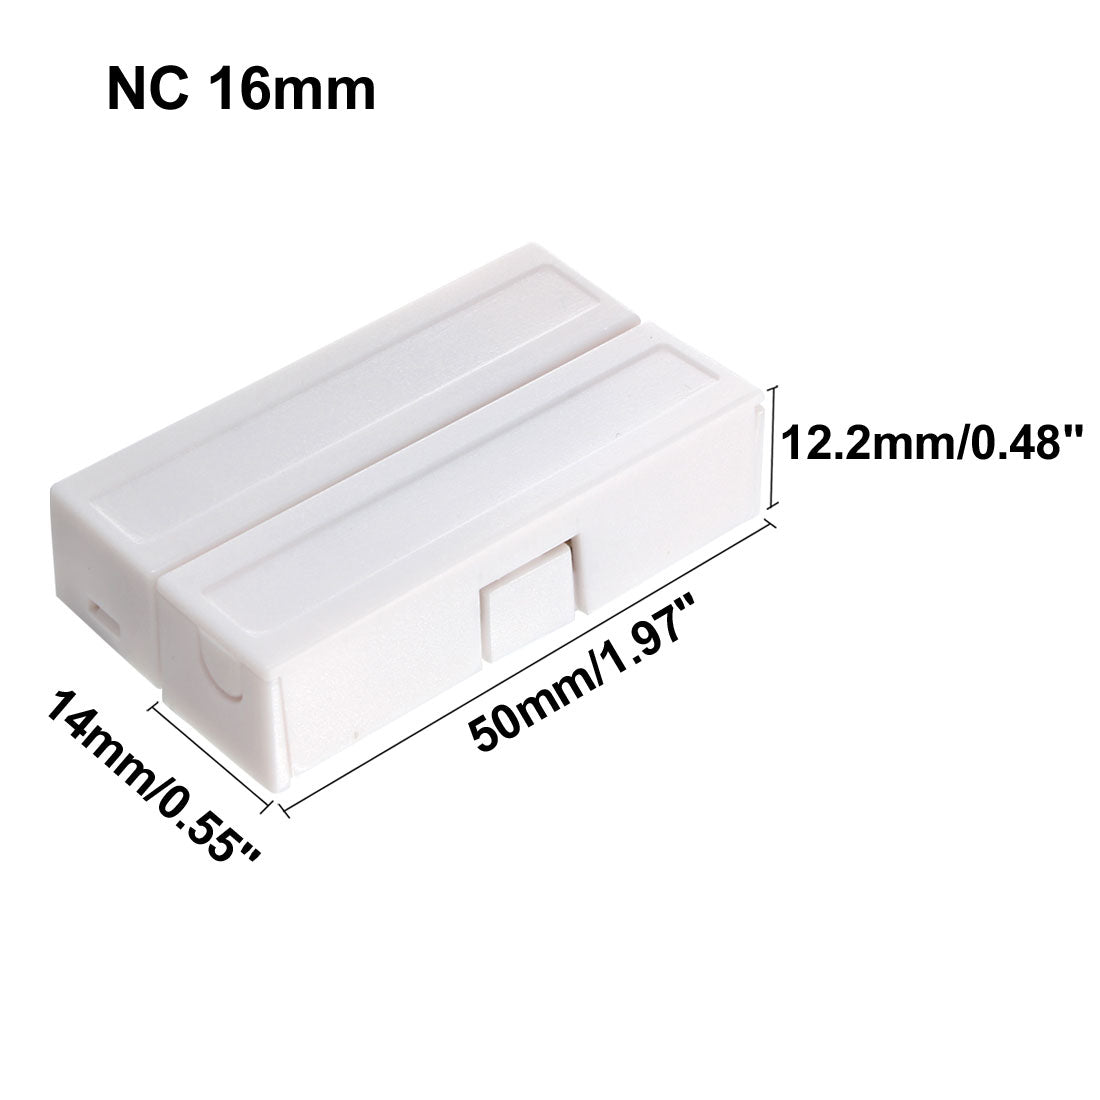 uxcell Uxcell 5pcs MC-51 Surface Mount Wired NC Door Contact Sensor Alarm Magnetic Reed Switch White